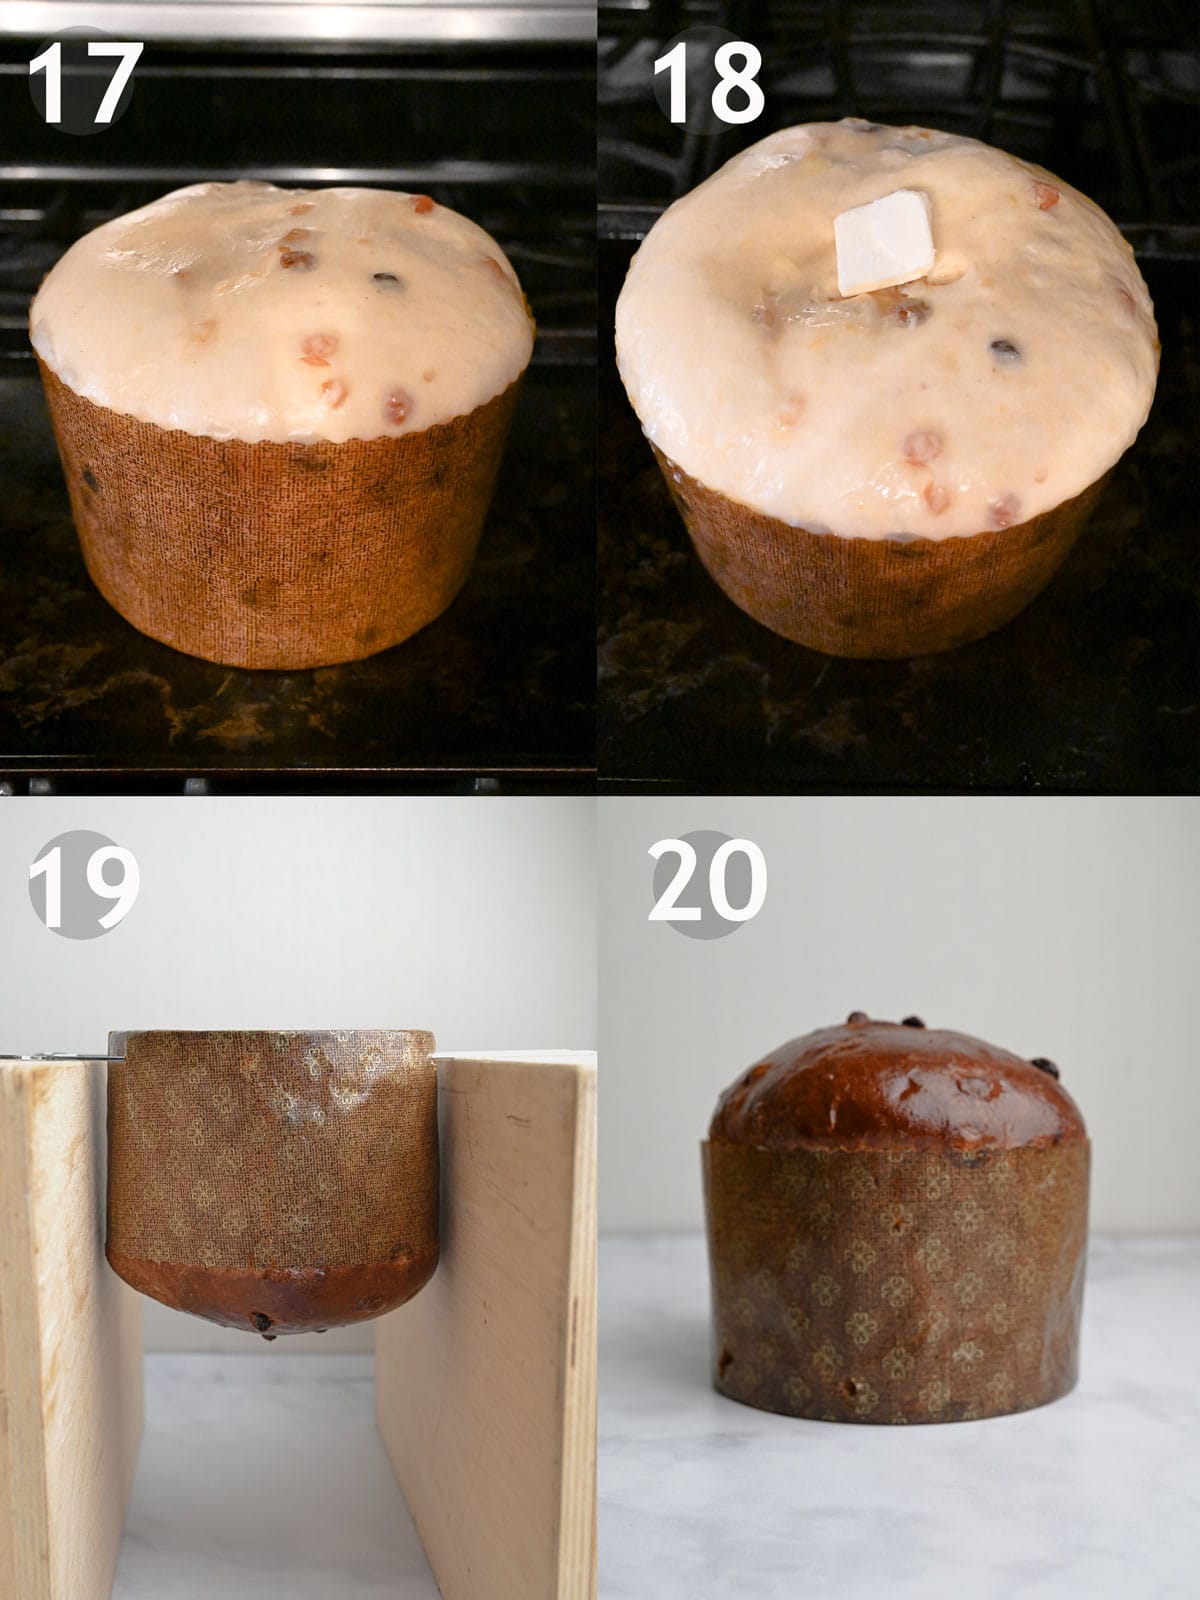 Panettone, steps 17-20, including baking the bread and hanging it upside down to cool.